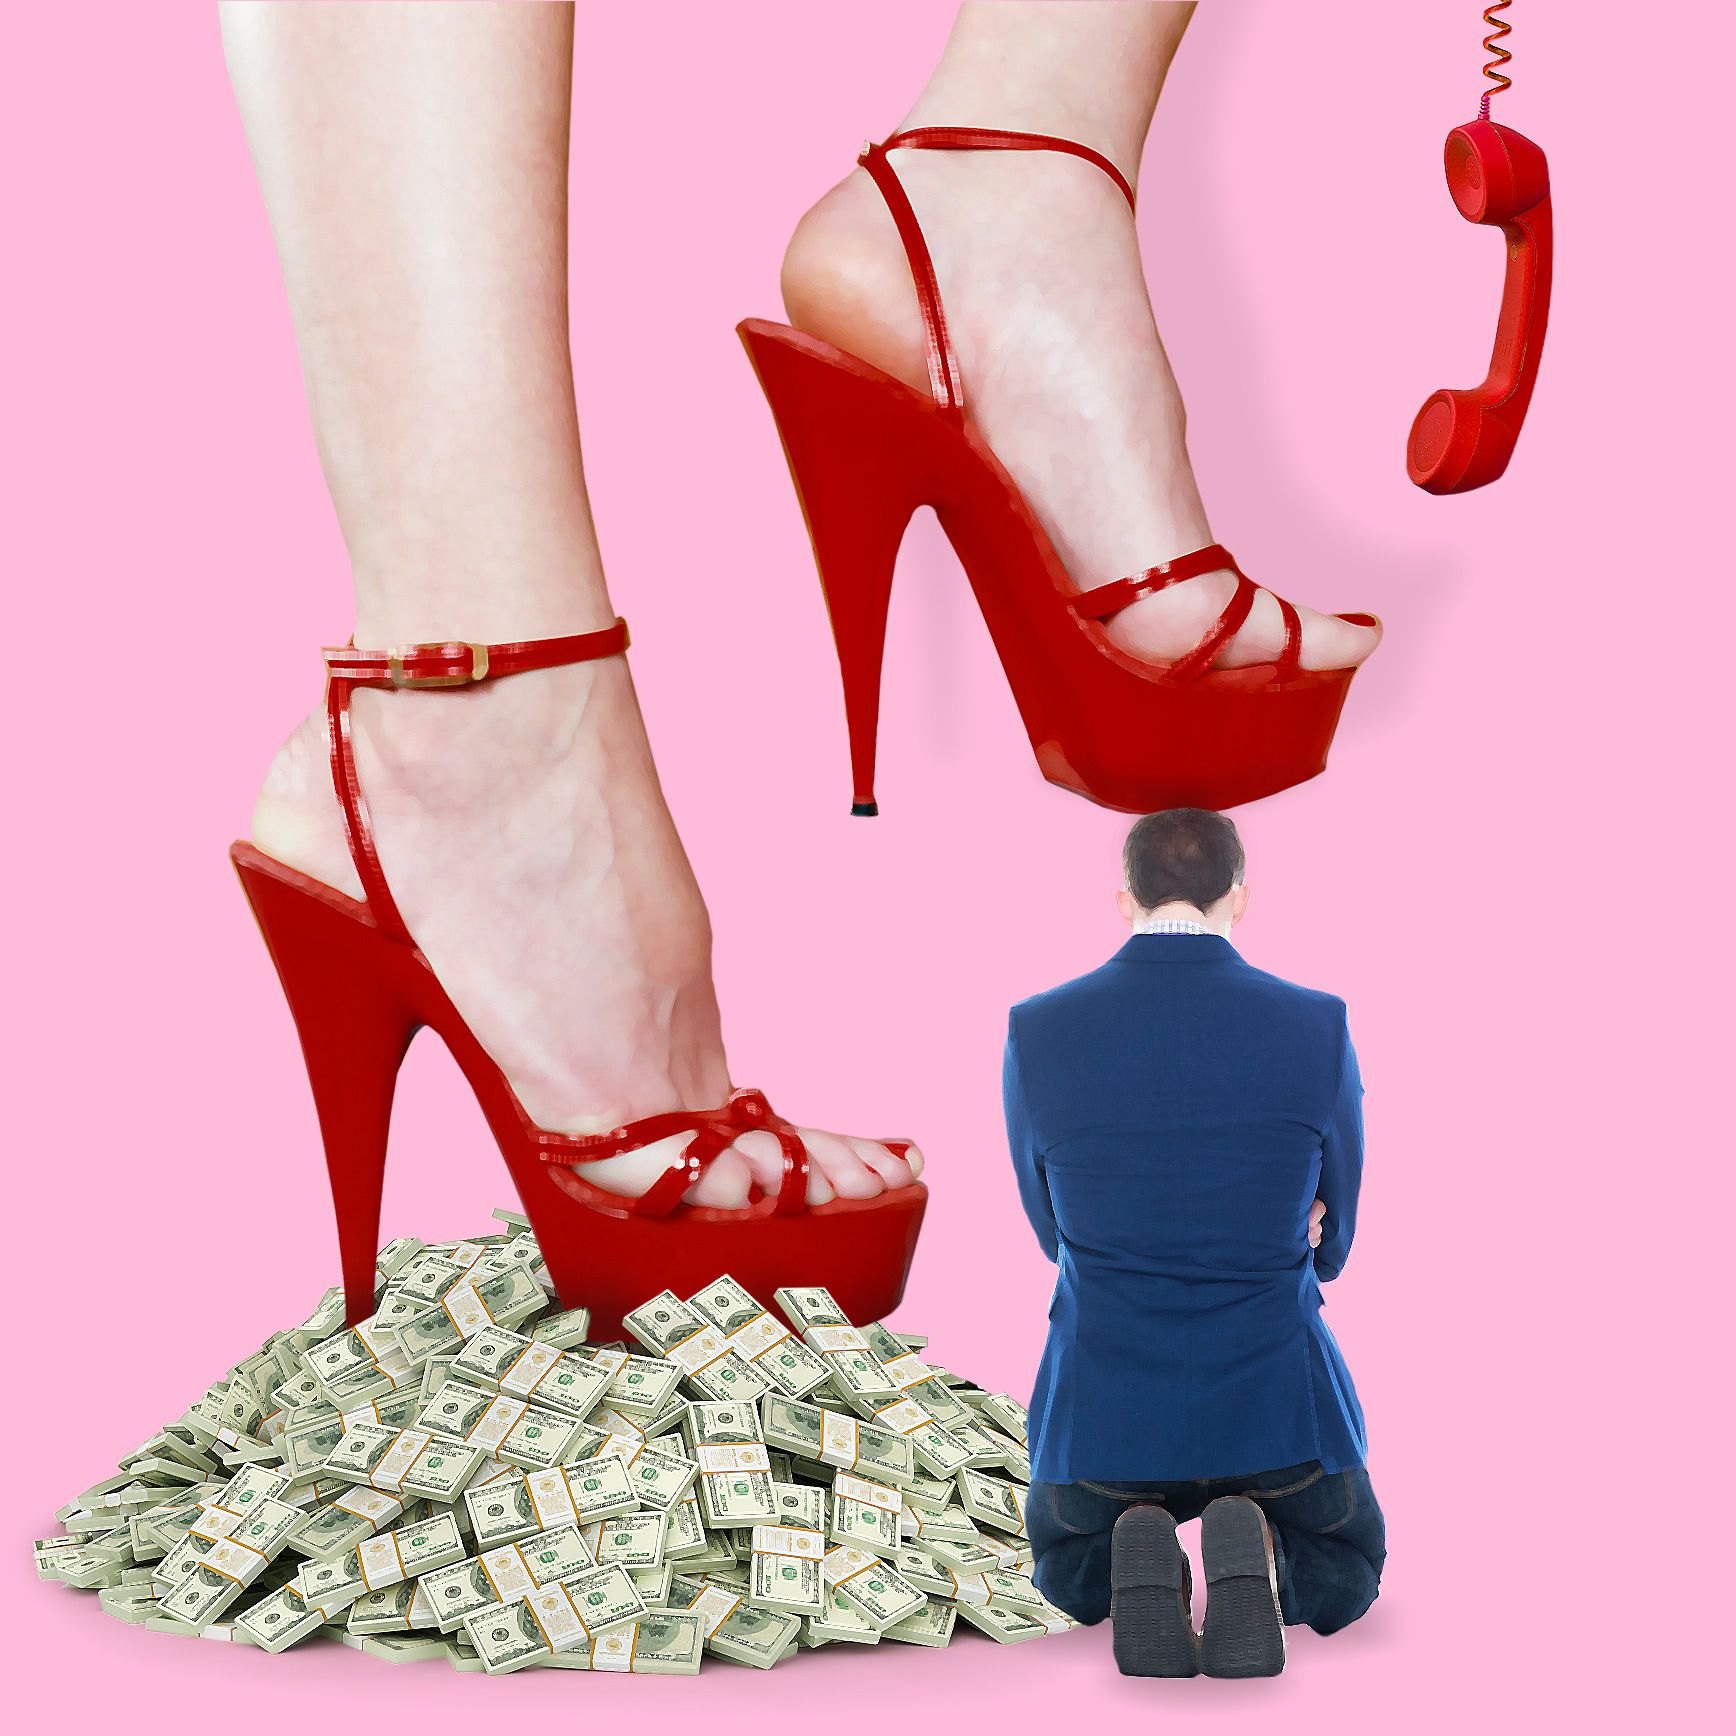 Confessions of a 'Pay Pig': Why I Give Away Money to Dominant Women I Meet Online